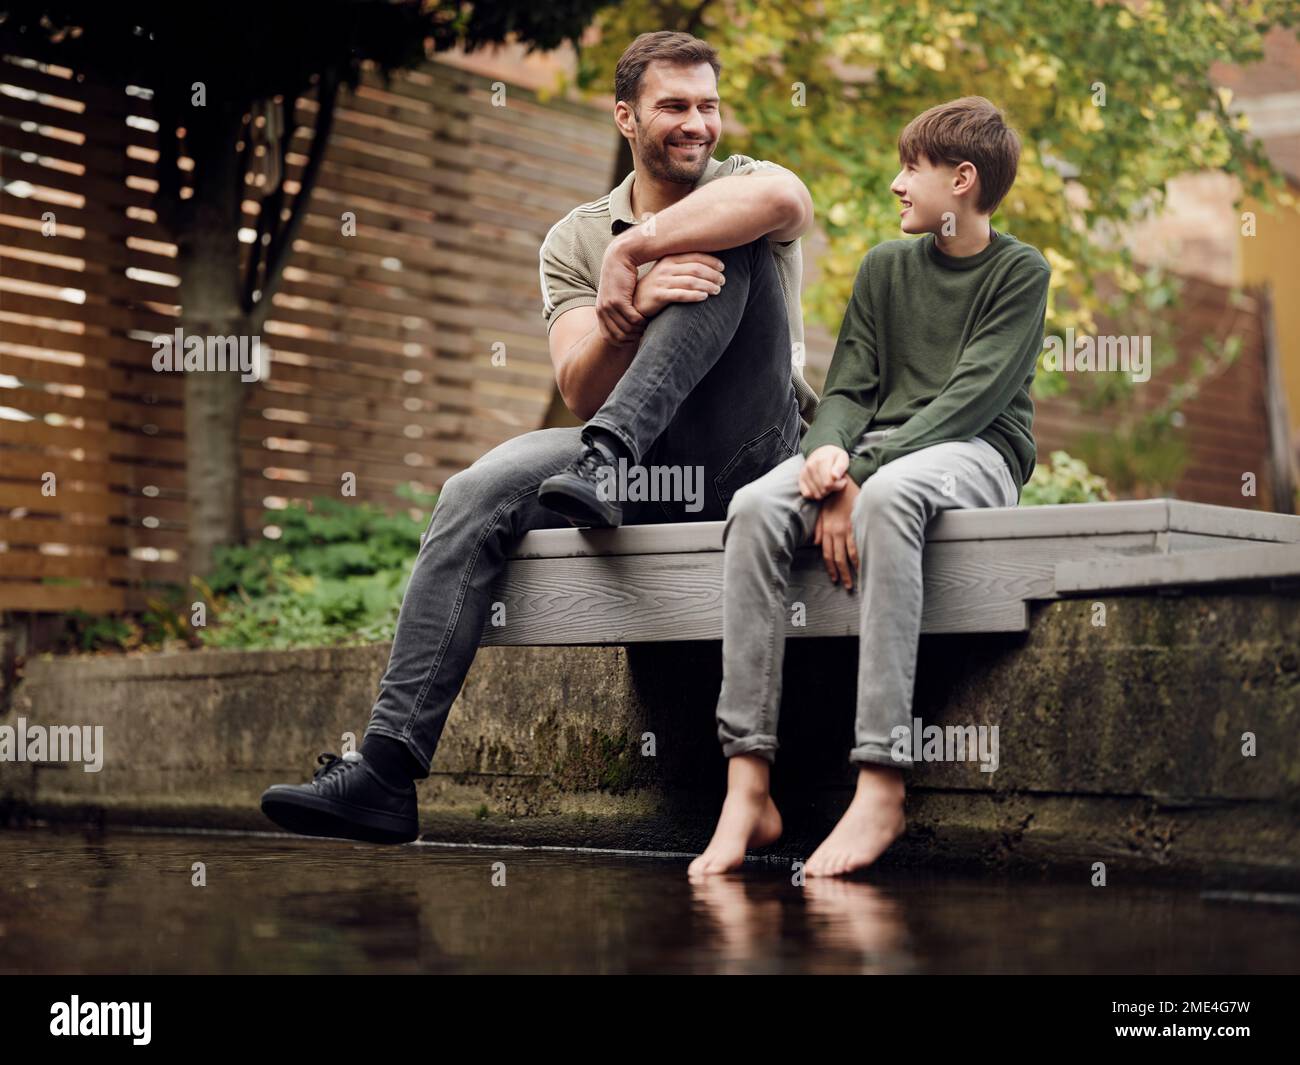 Fathe and son spending time in garden together Stock Photo